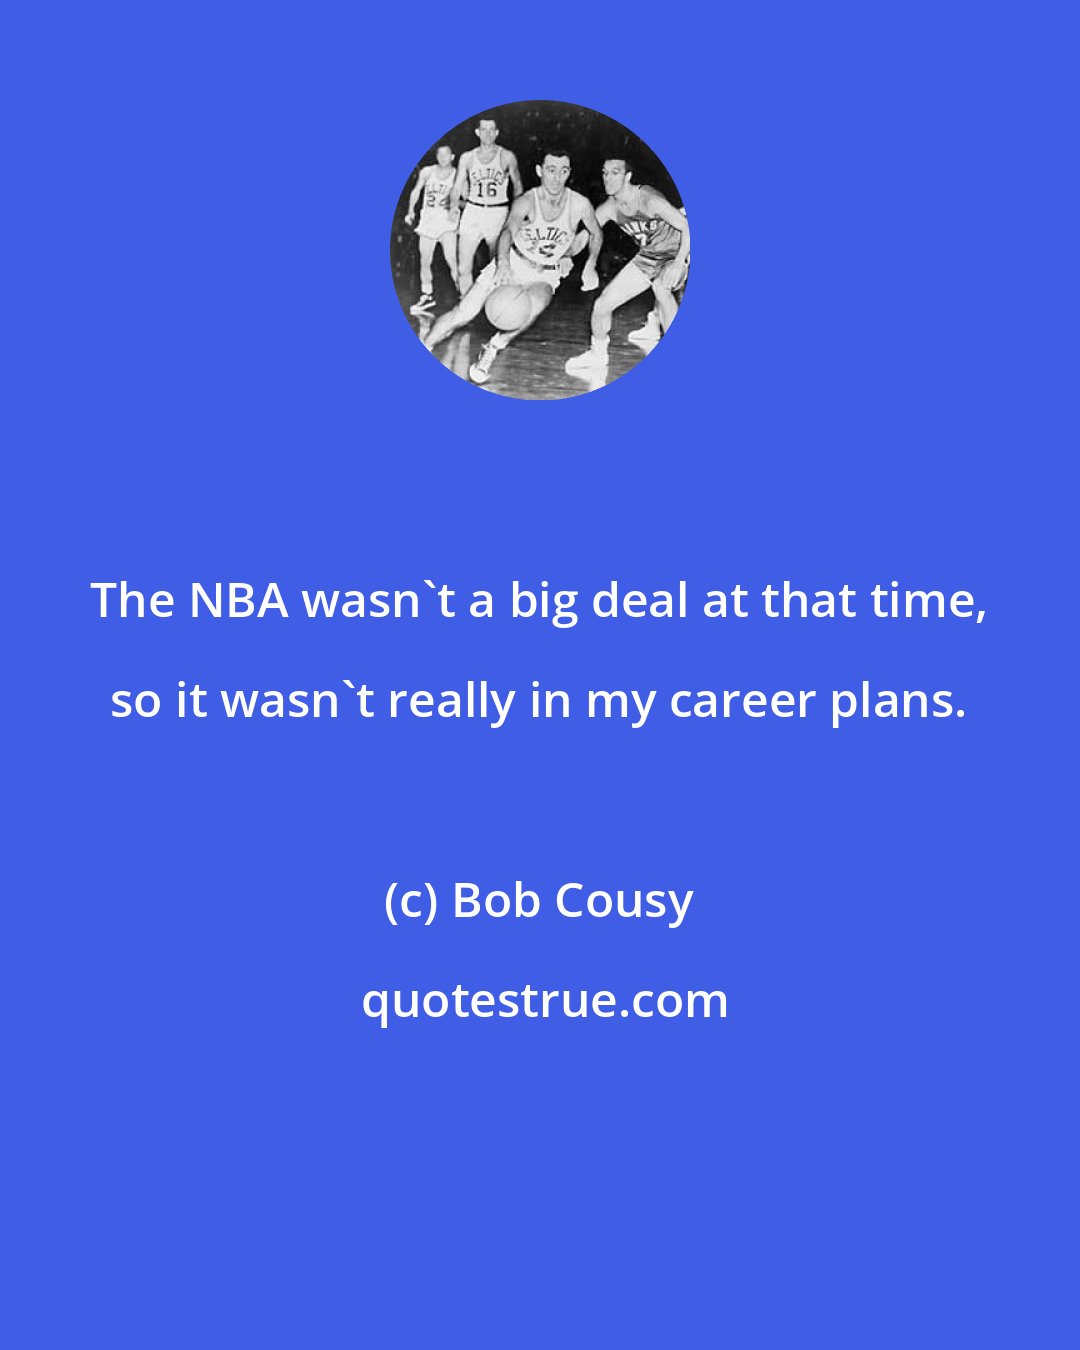 Bob Cousy: The NBA wasn't a big deal at that time, so it wasn't really in my career plans.